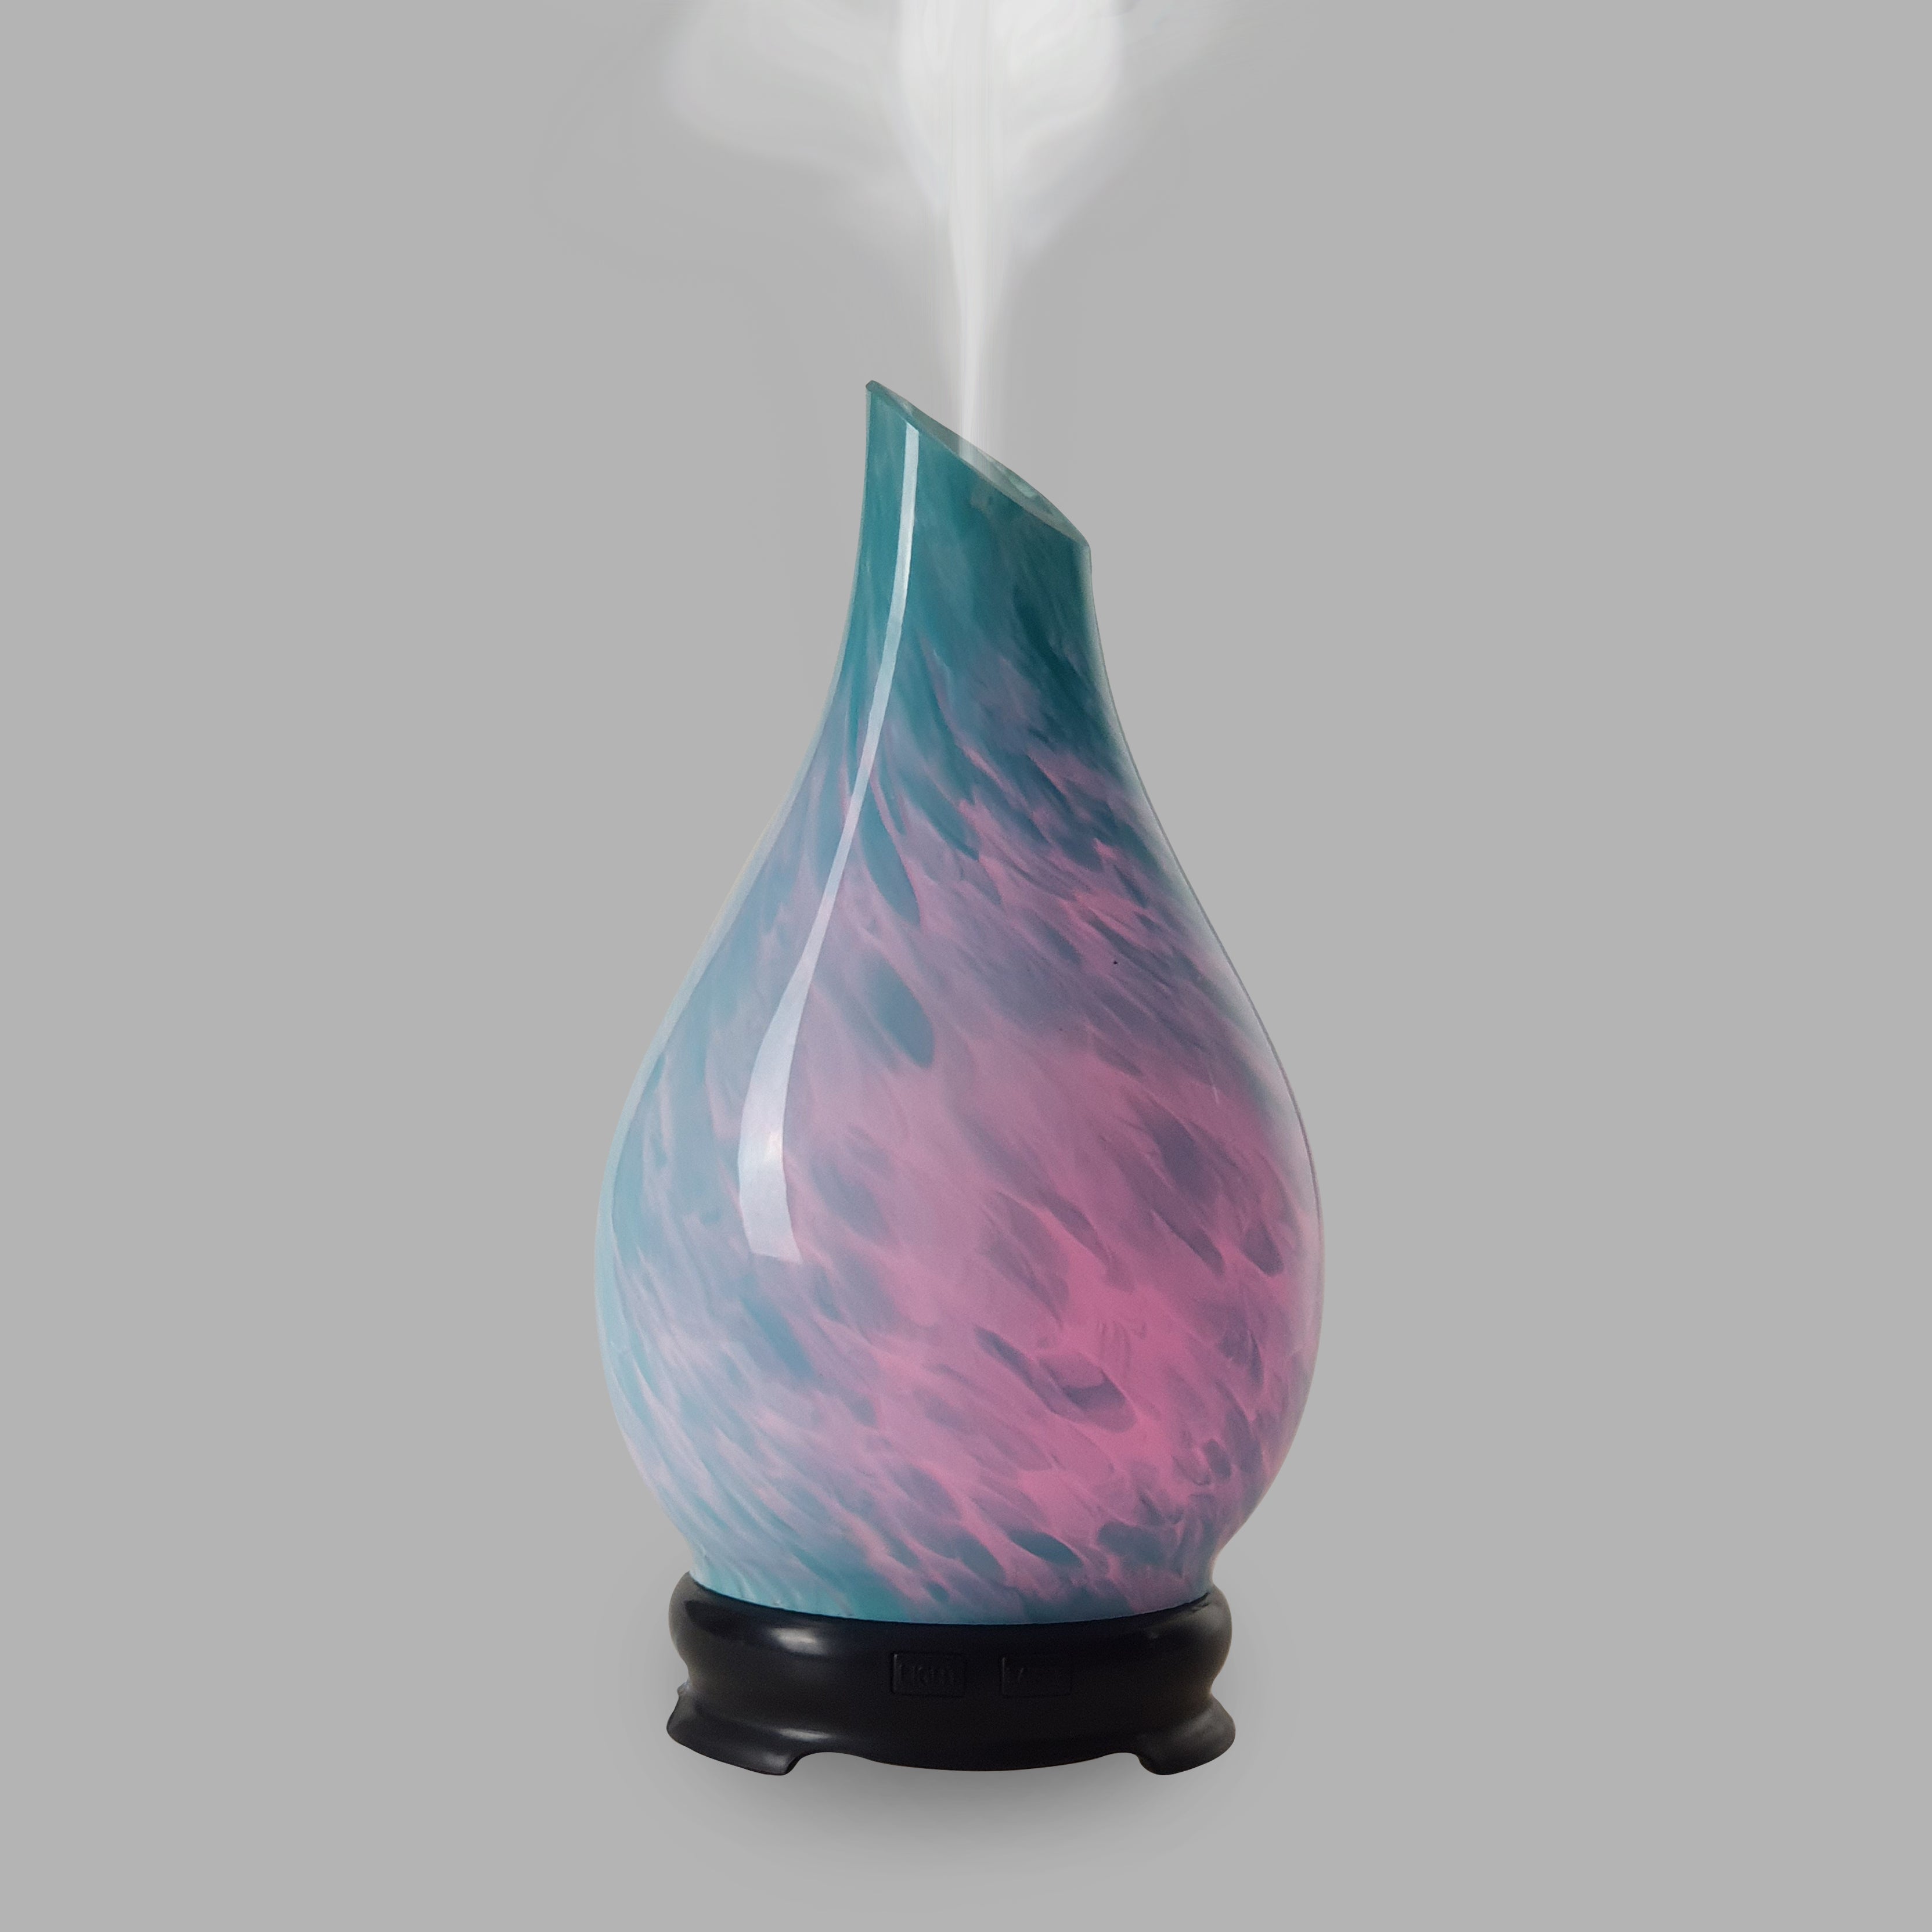 Perfect for the lovers of the ocean, this aromatherapy diffuser engulfs your room in blue as it reflects the beauty of the ocean.  